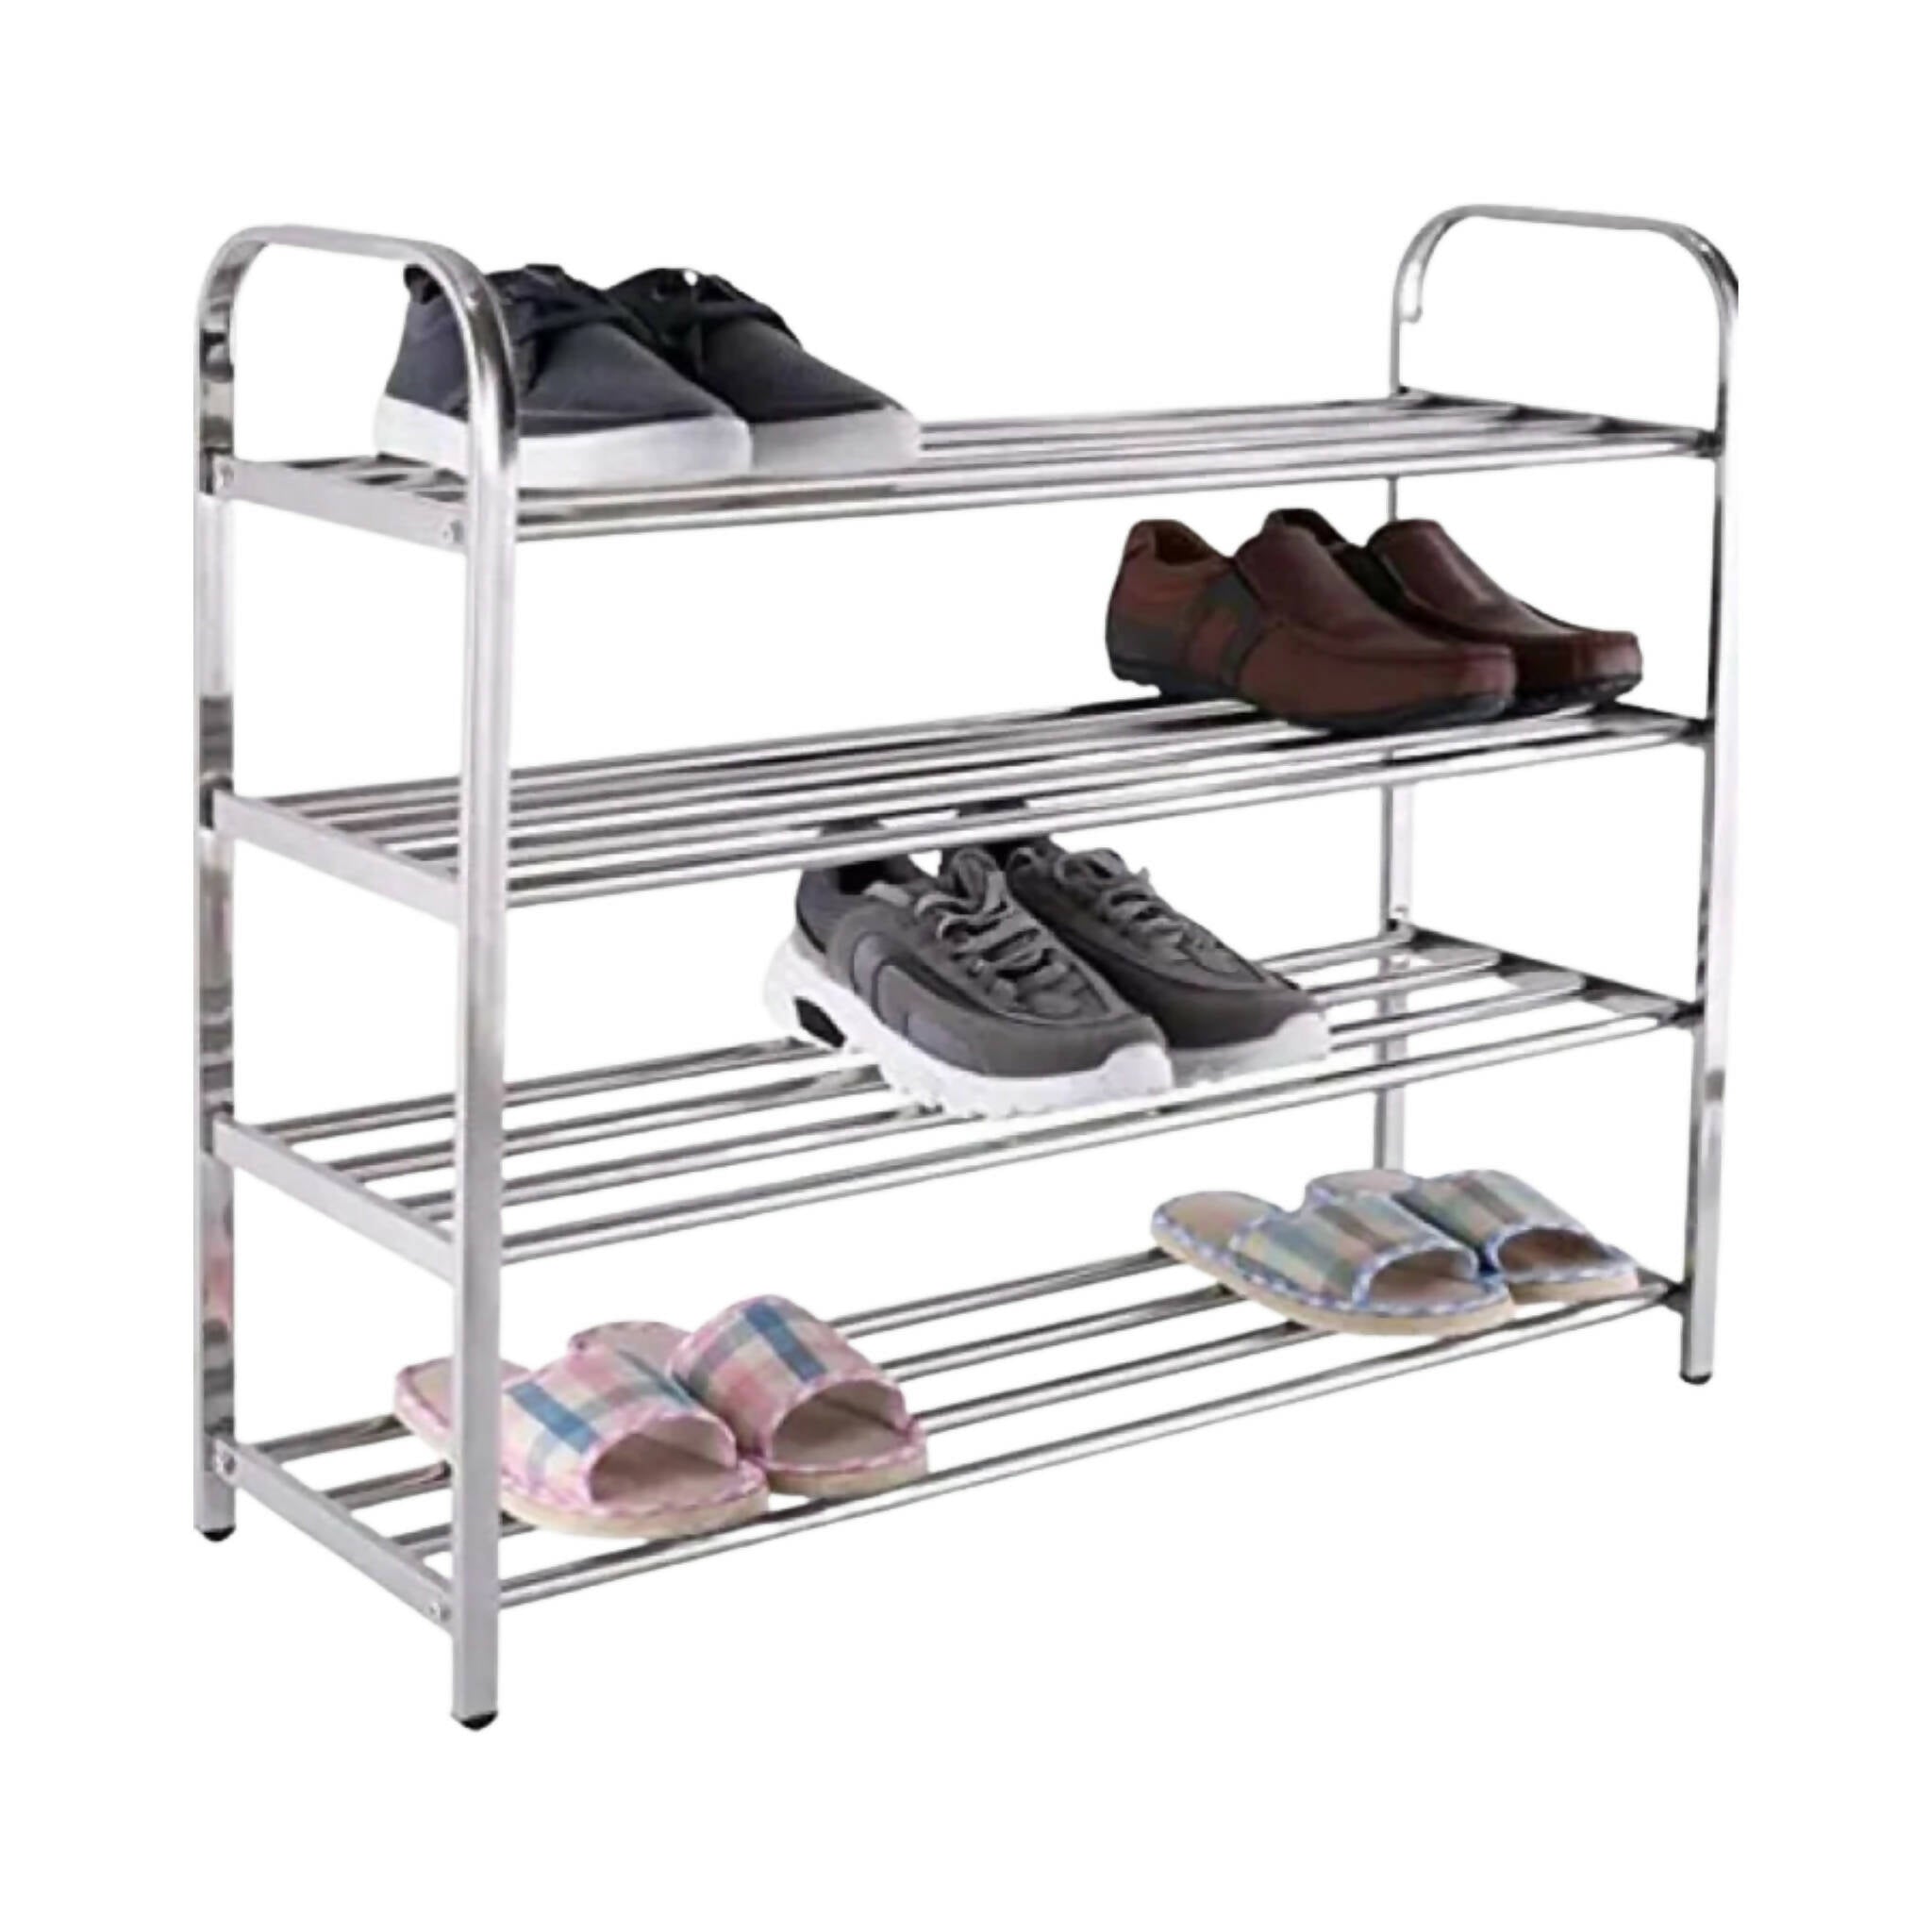 Shoe Rack, Stainless Steel - Organize with Style!